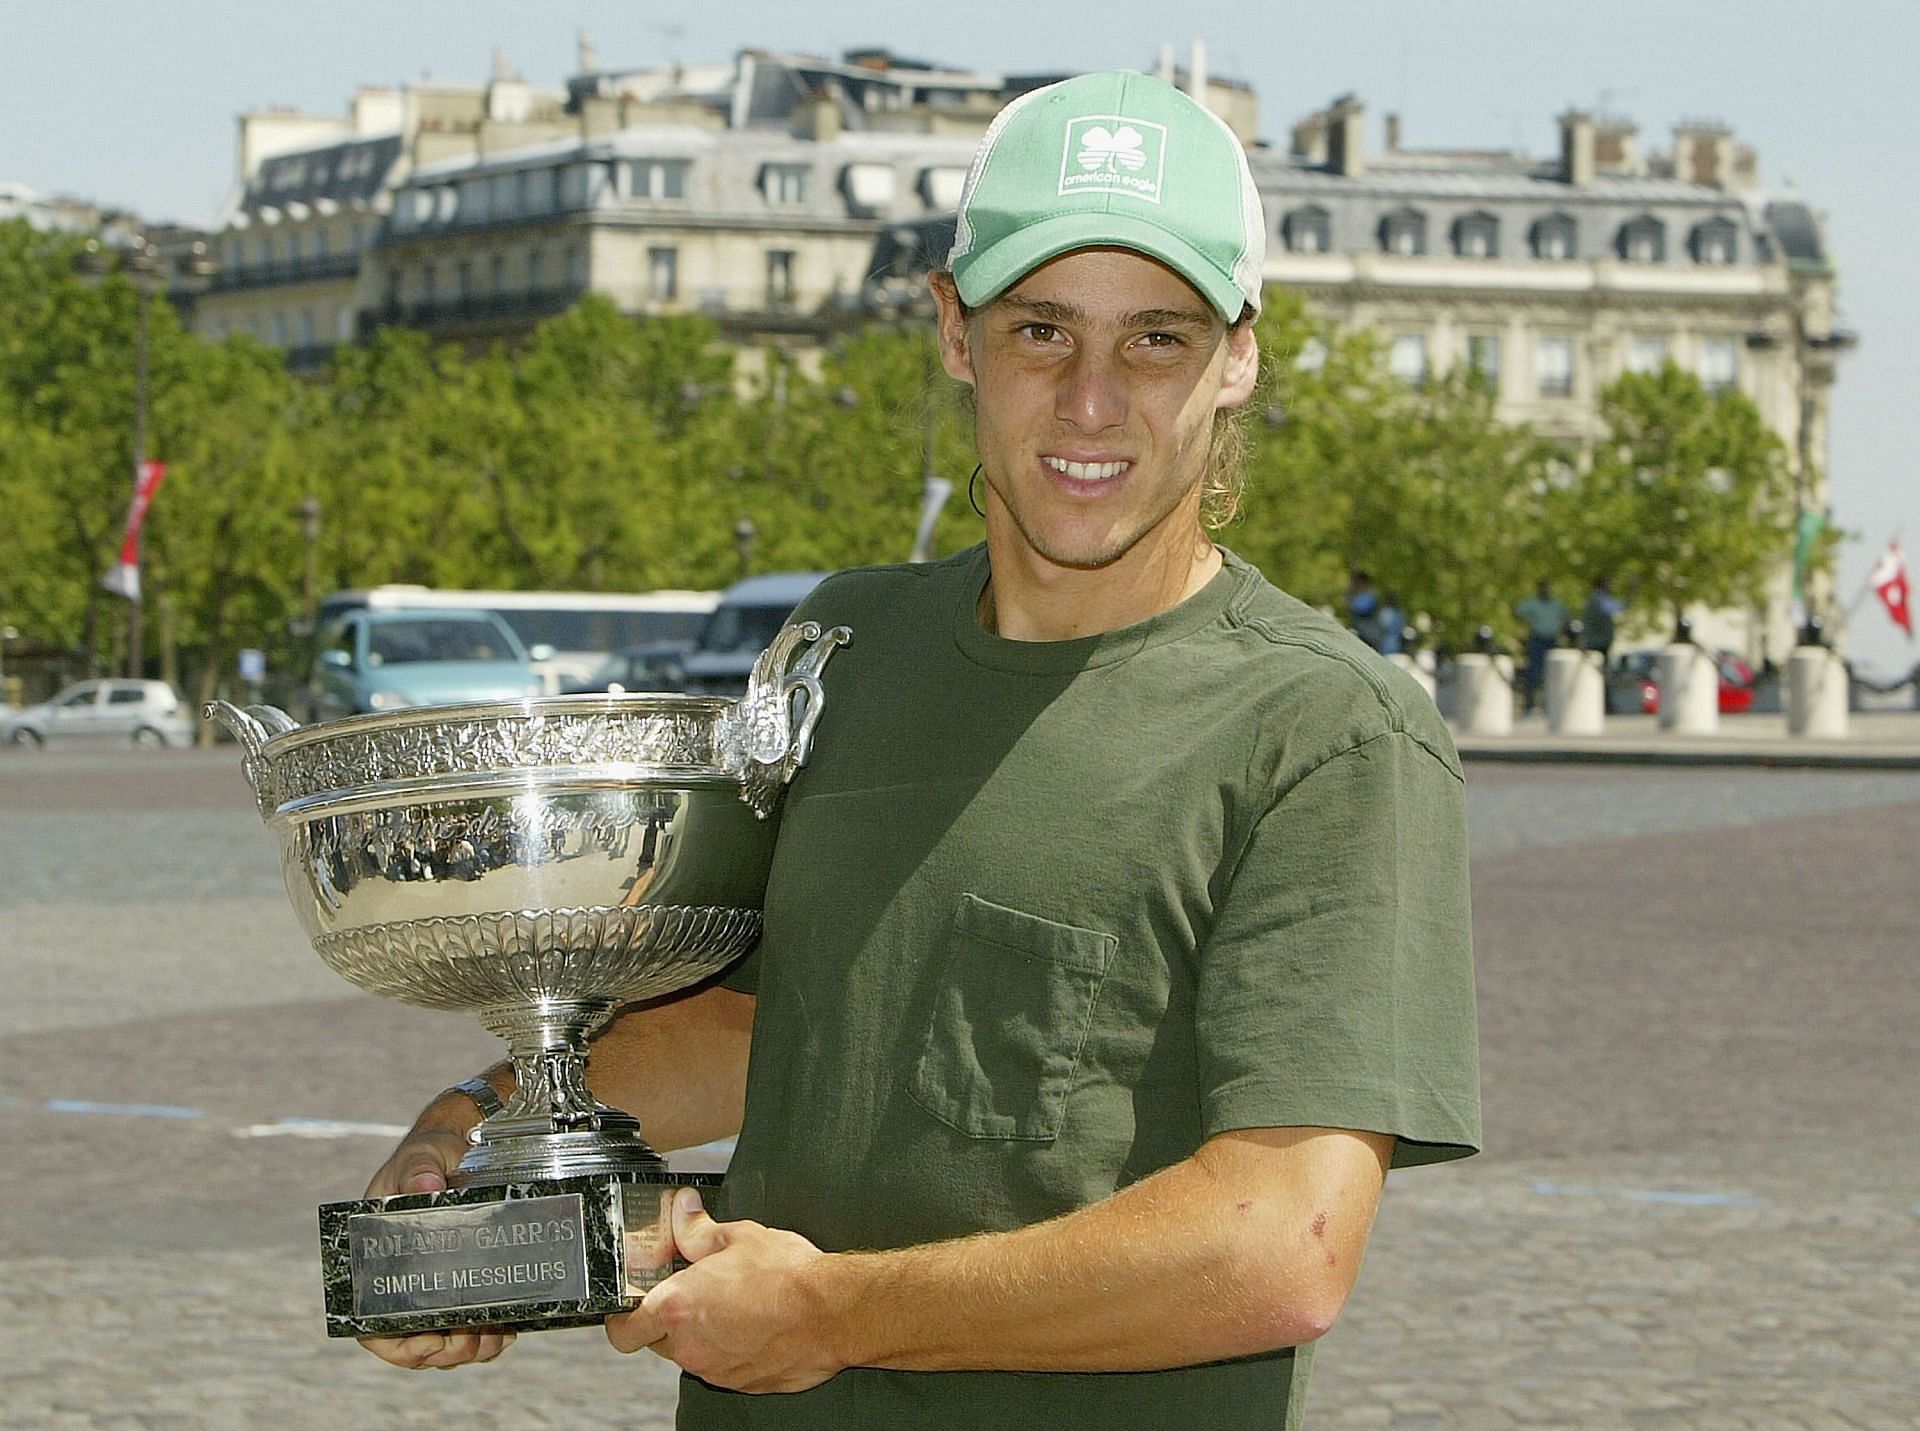 Gaston Gaudio is one of the most unlikely winners of the French Open